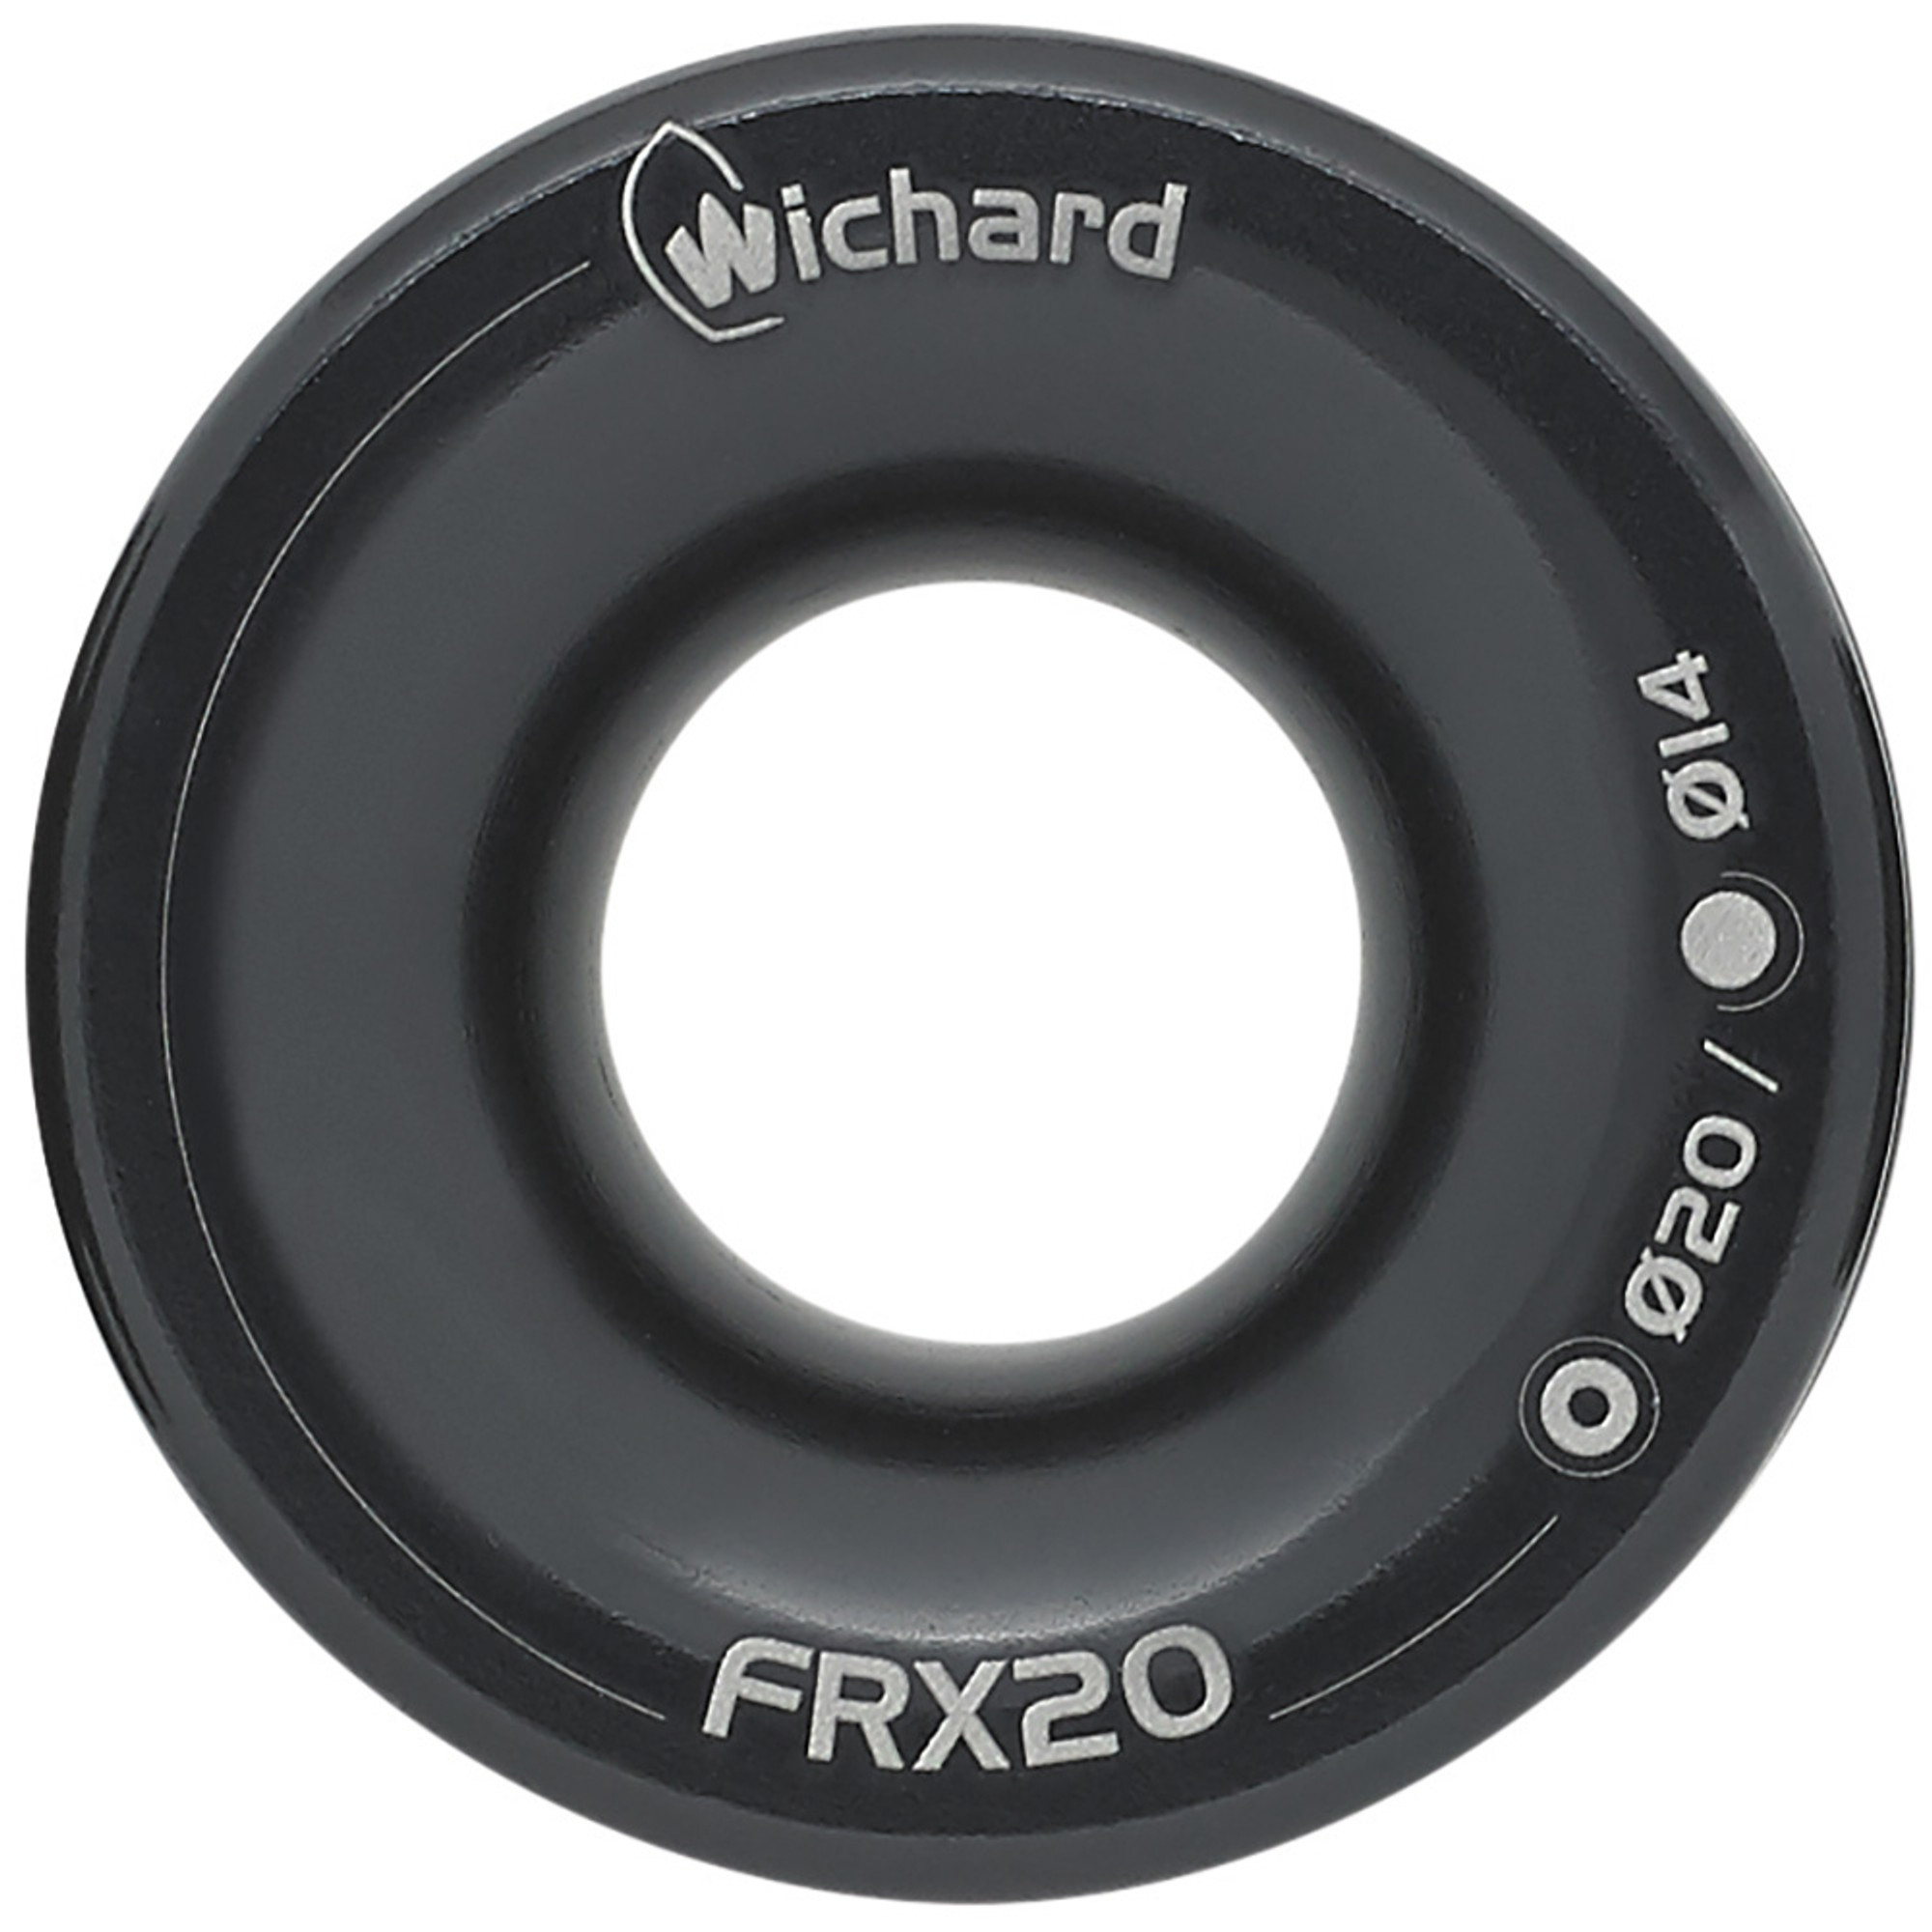 Wichard FRX20 Friction Ring - 20mm (25/32")